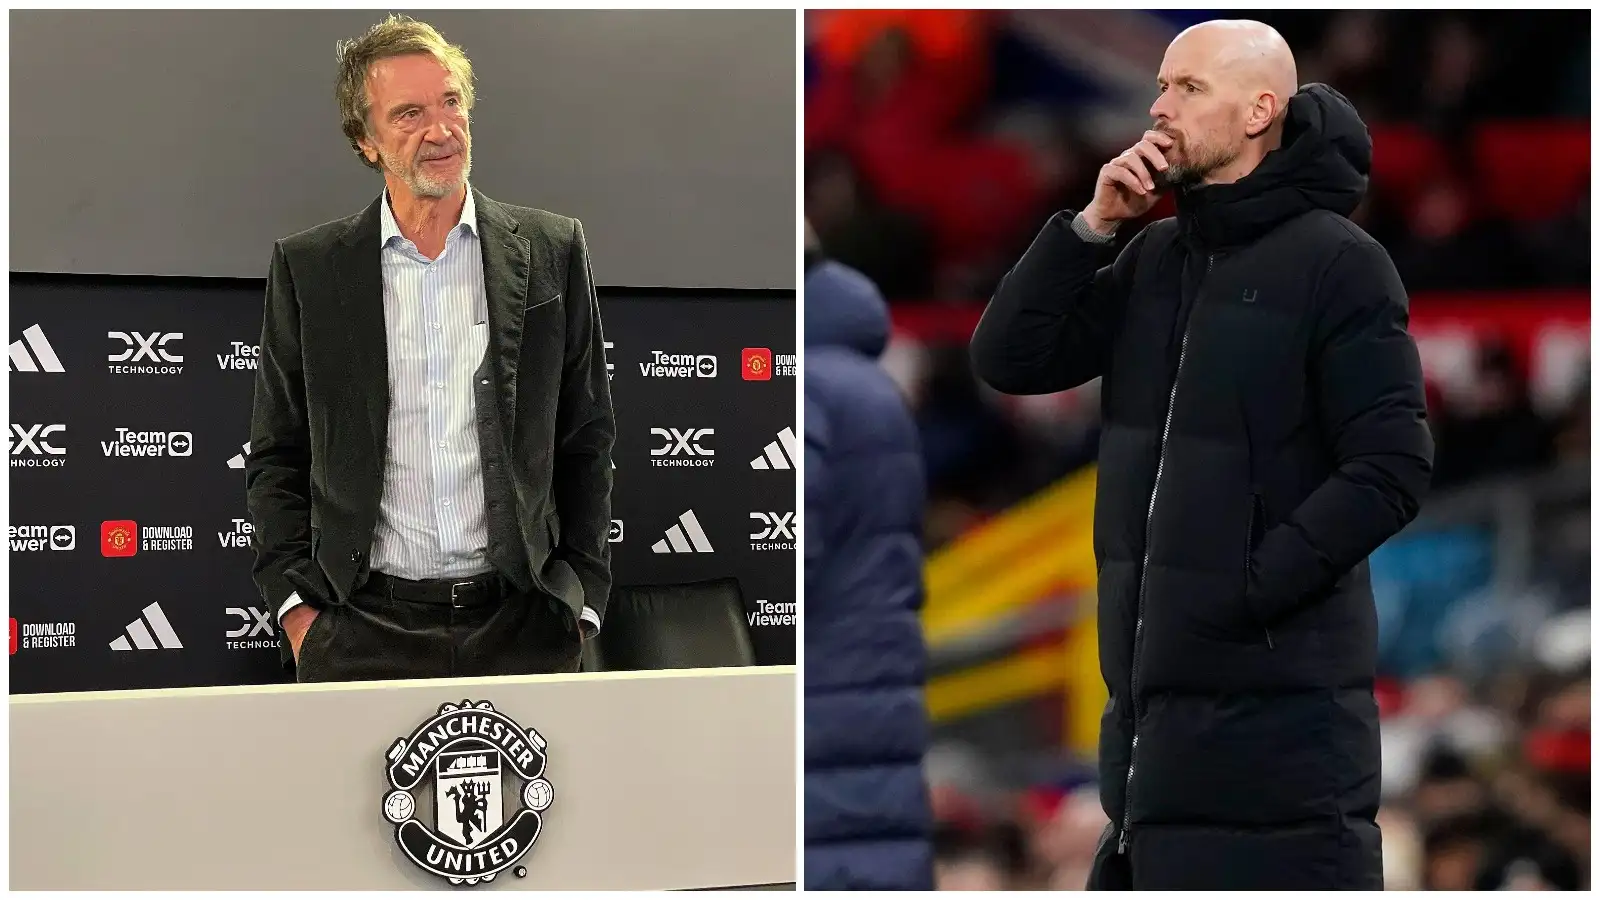 Sir Jim Ratcliffe has a judgment to make over Erik ten Hag's future at Manchester United.